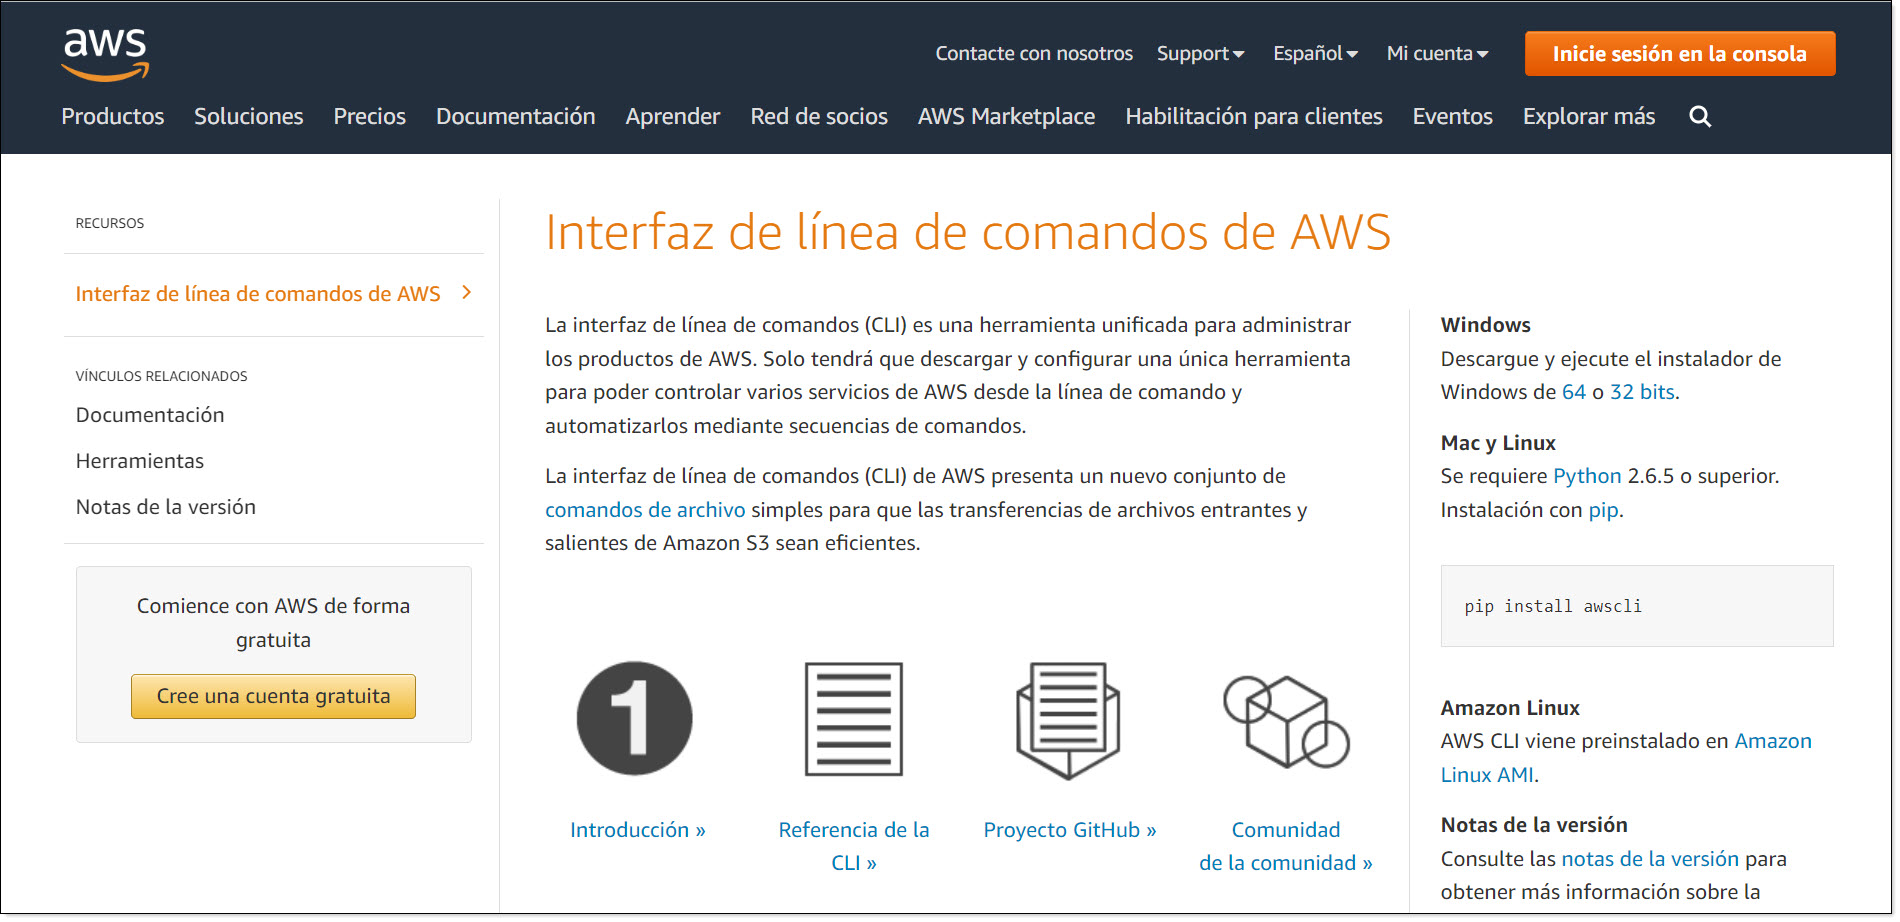 Part 1 - Download and install the appropriate version of AWS CLI